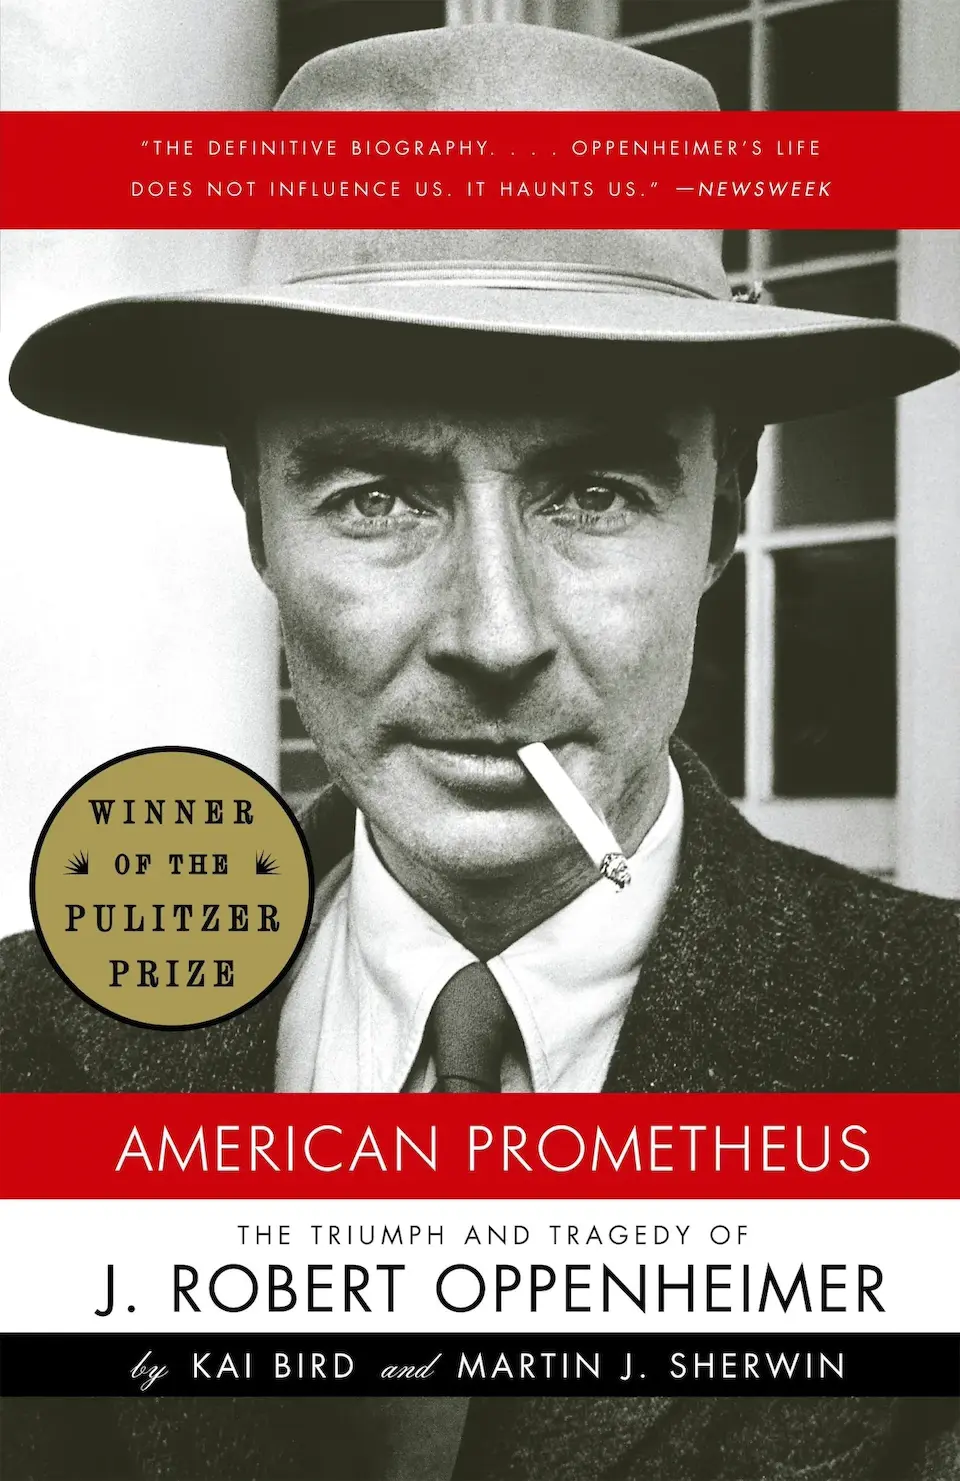 American Prometheus: The Tragedy and Triumph of J. Robert Oppenheimer by Kai Bird and Martin J. Sherwin finished on 2022 Mar 24